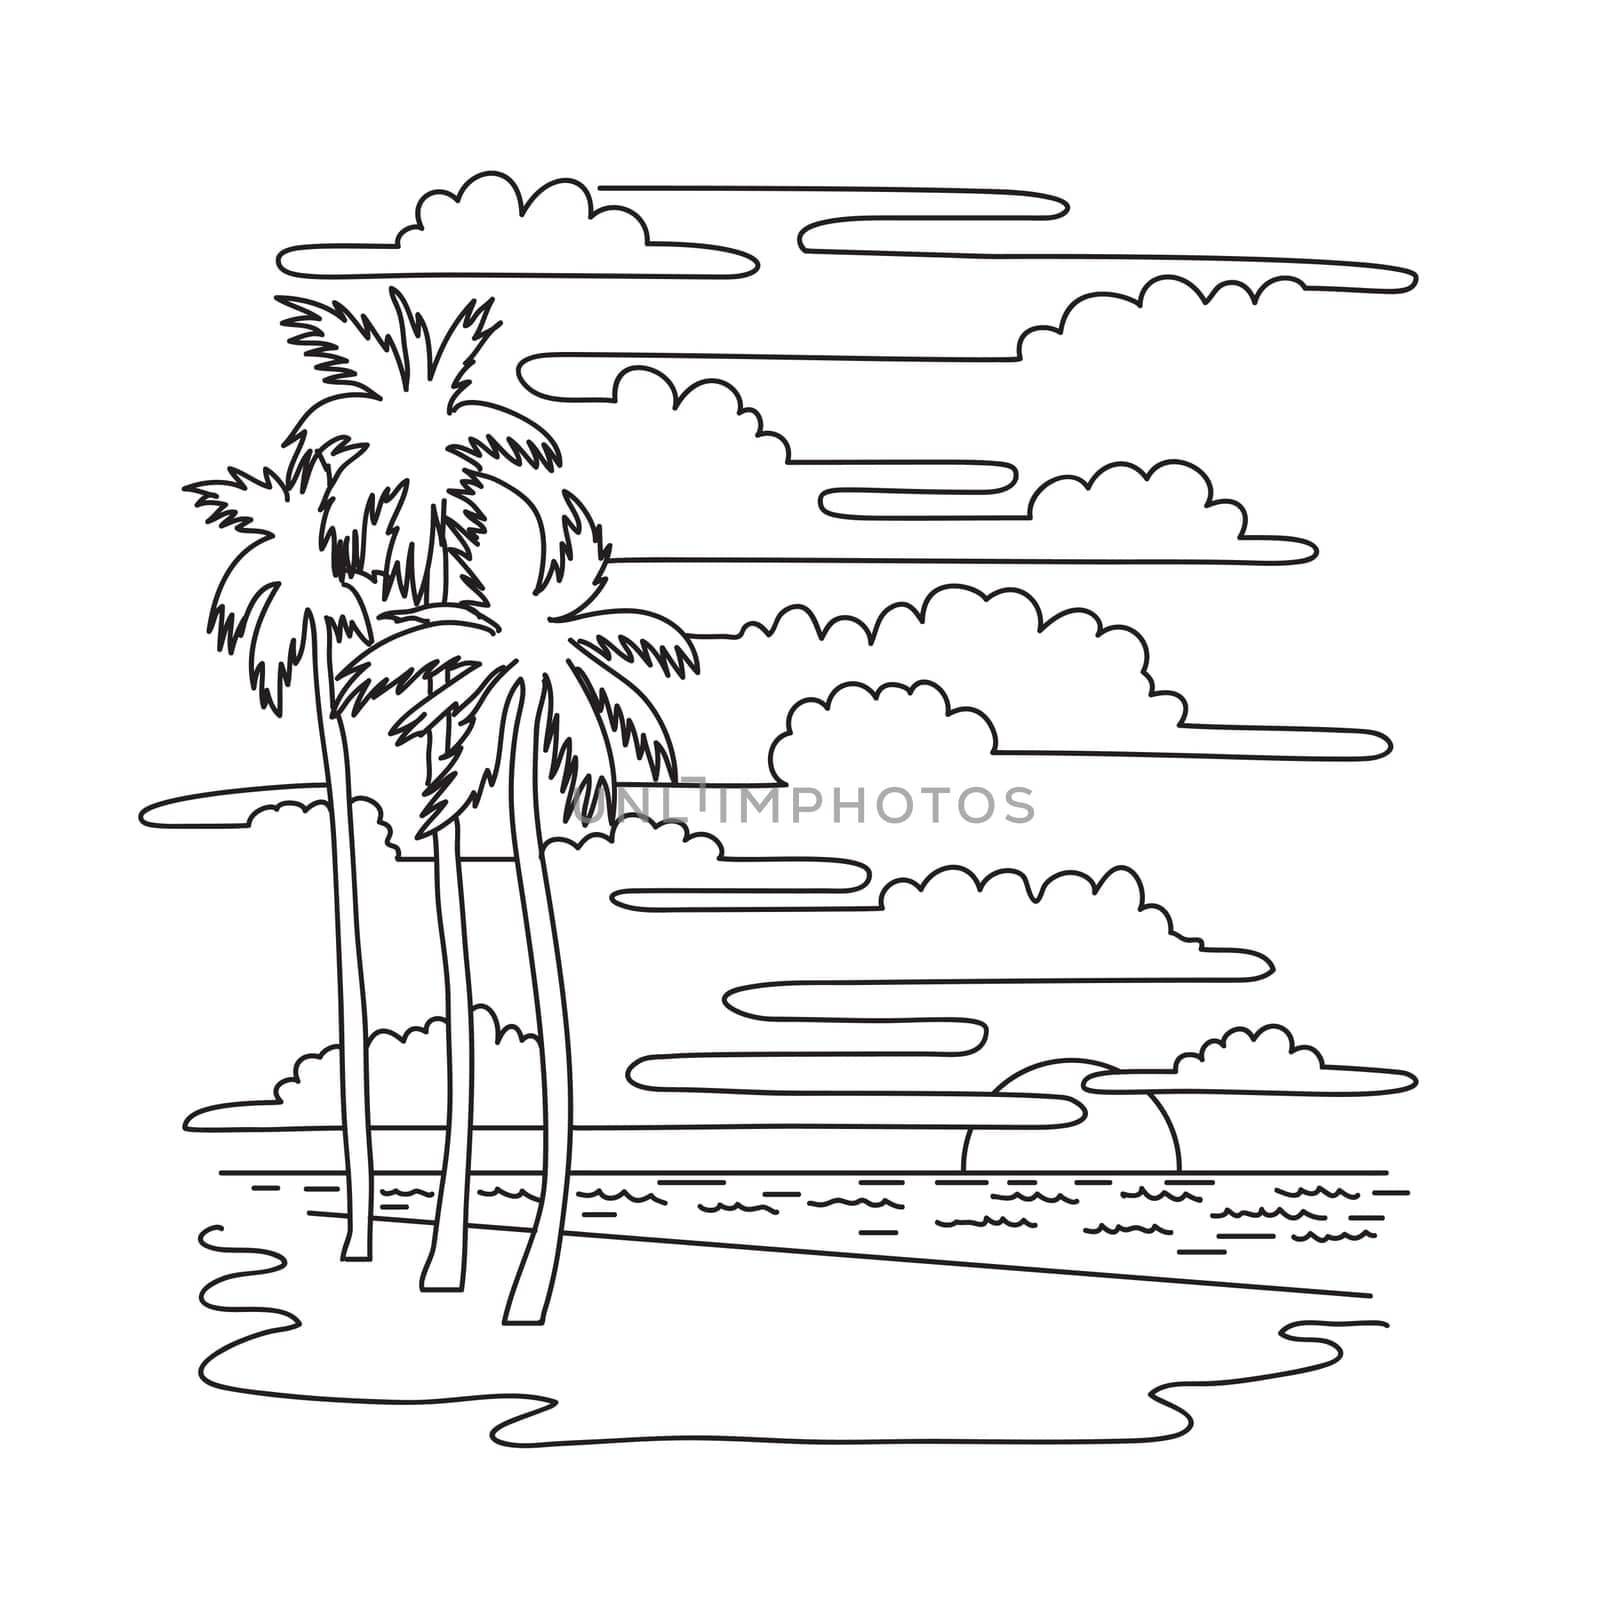 Mono line illustration of palm trees in Hollywood Beach located between Fort Lauderdale and Miami Beach in South Florida, USA  done in monoline line art black and white style.
